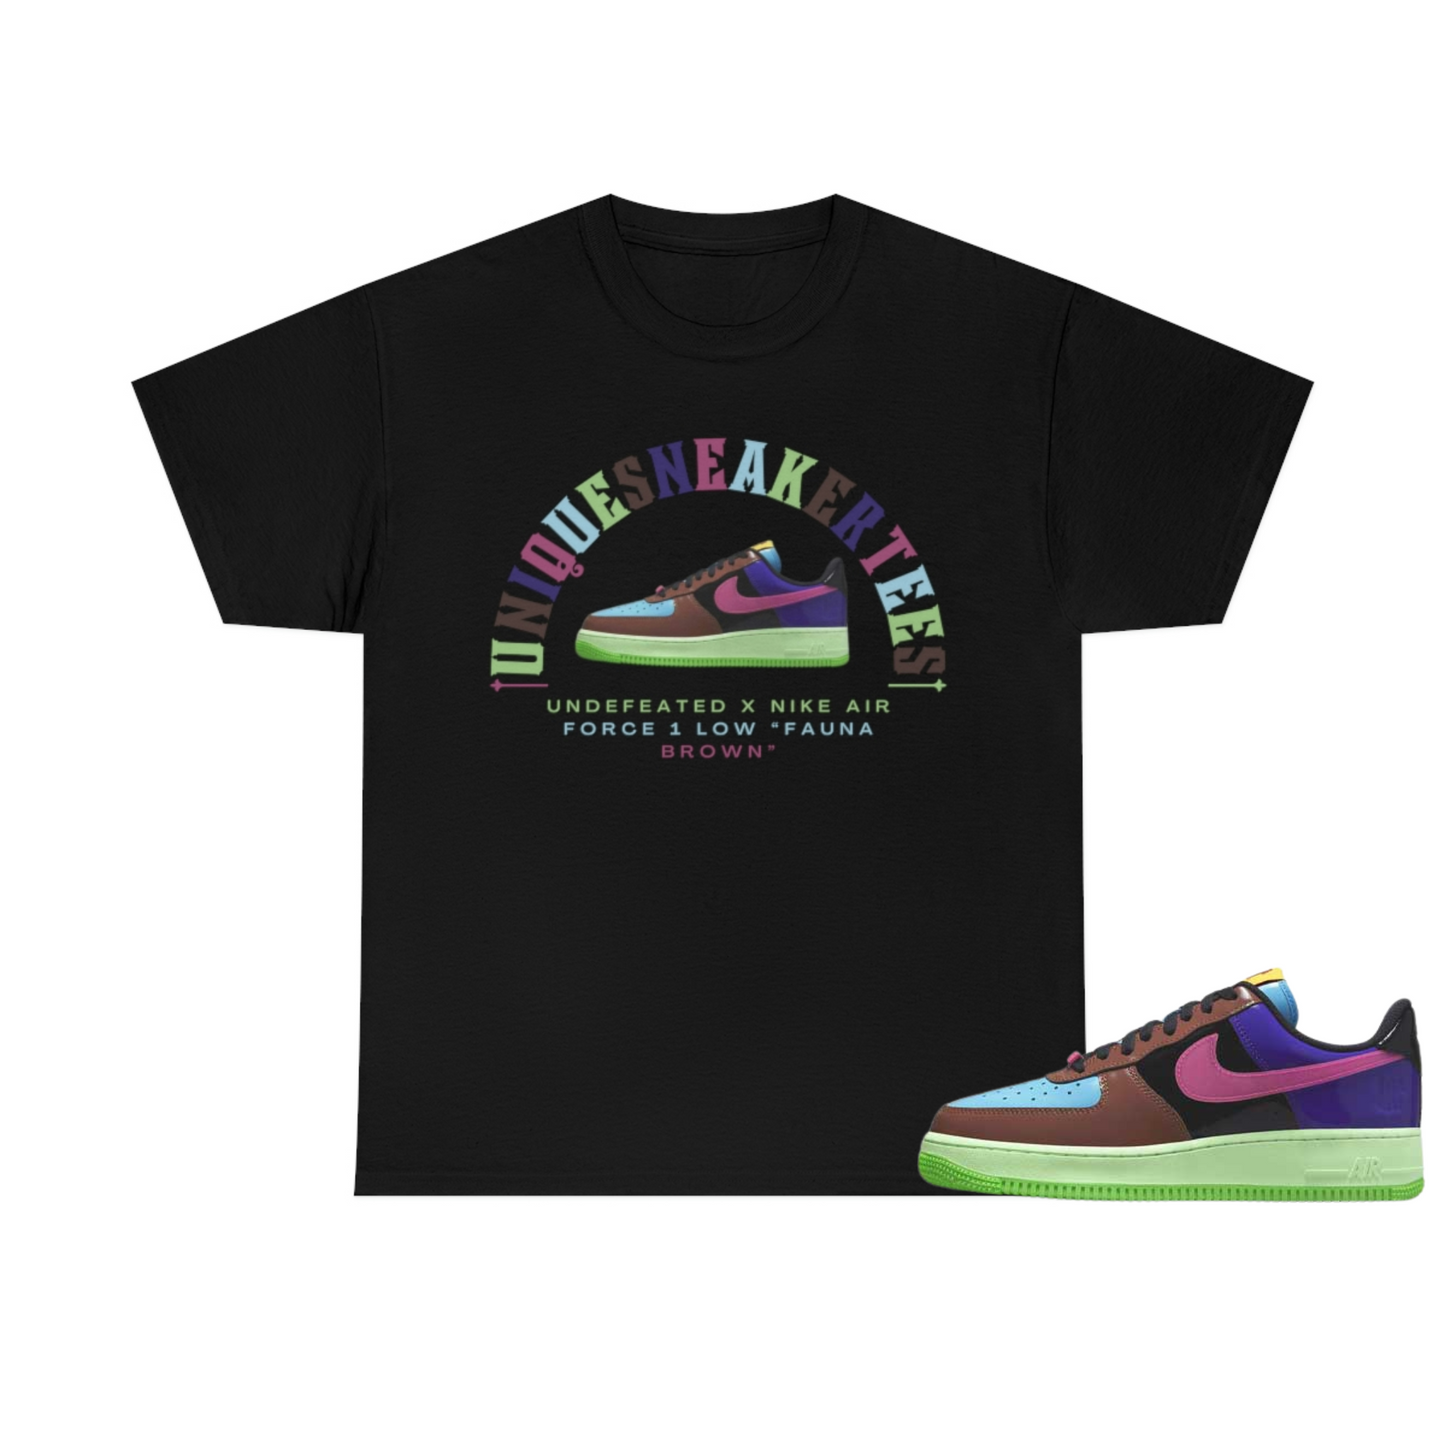 Undefeated x Nike Air Force 1 Low “Fauna Brown” Tee